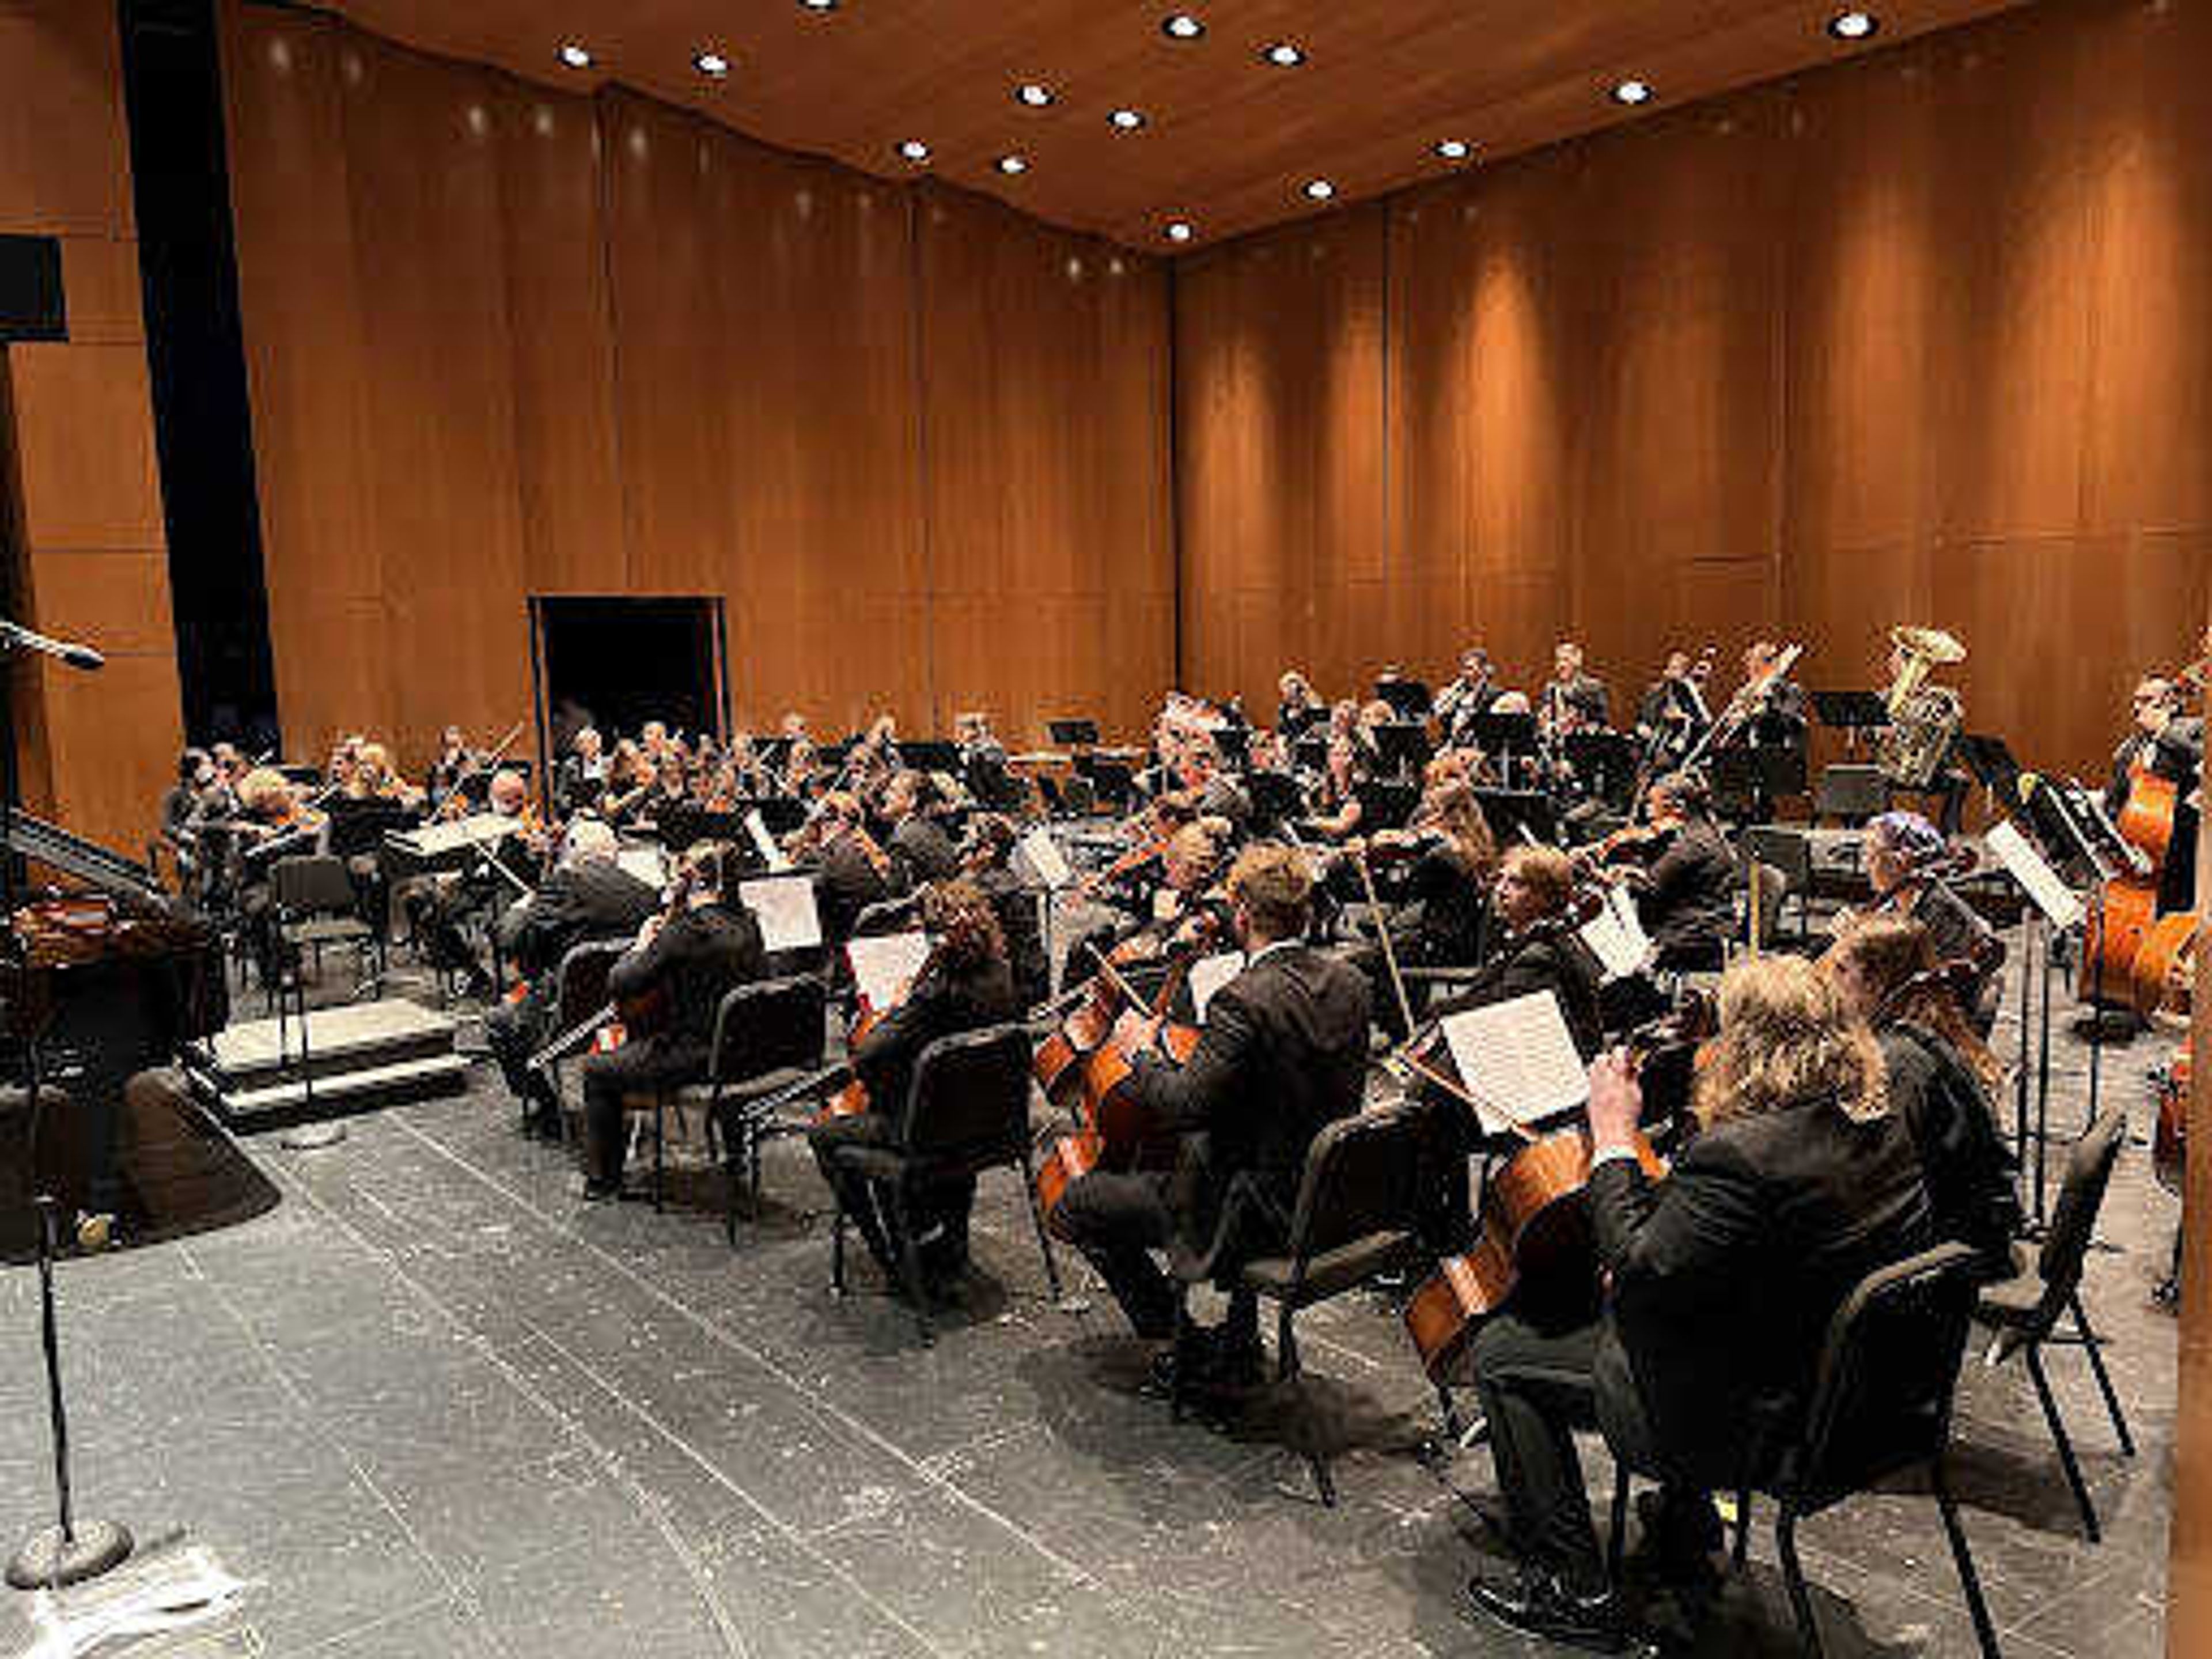 SEMO and SIU symphonies collab on “Tchaikovsky and Rachmaninoff” performance